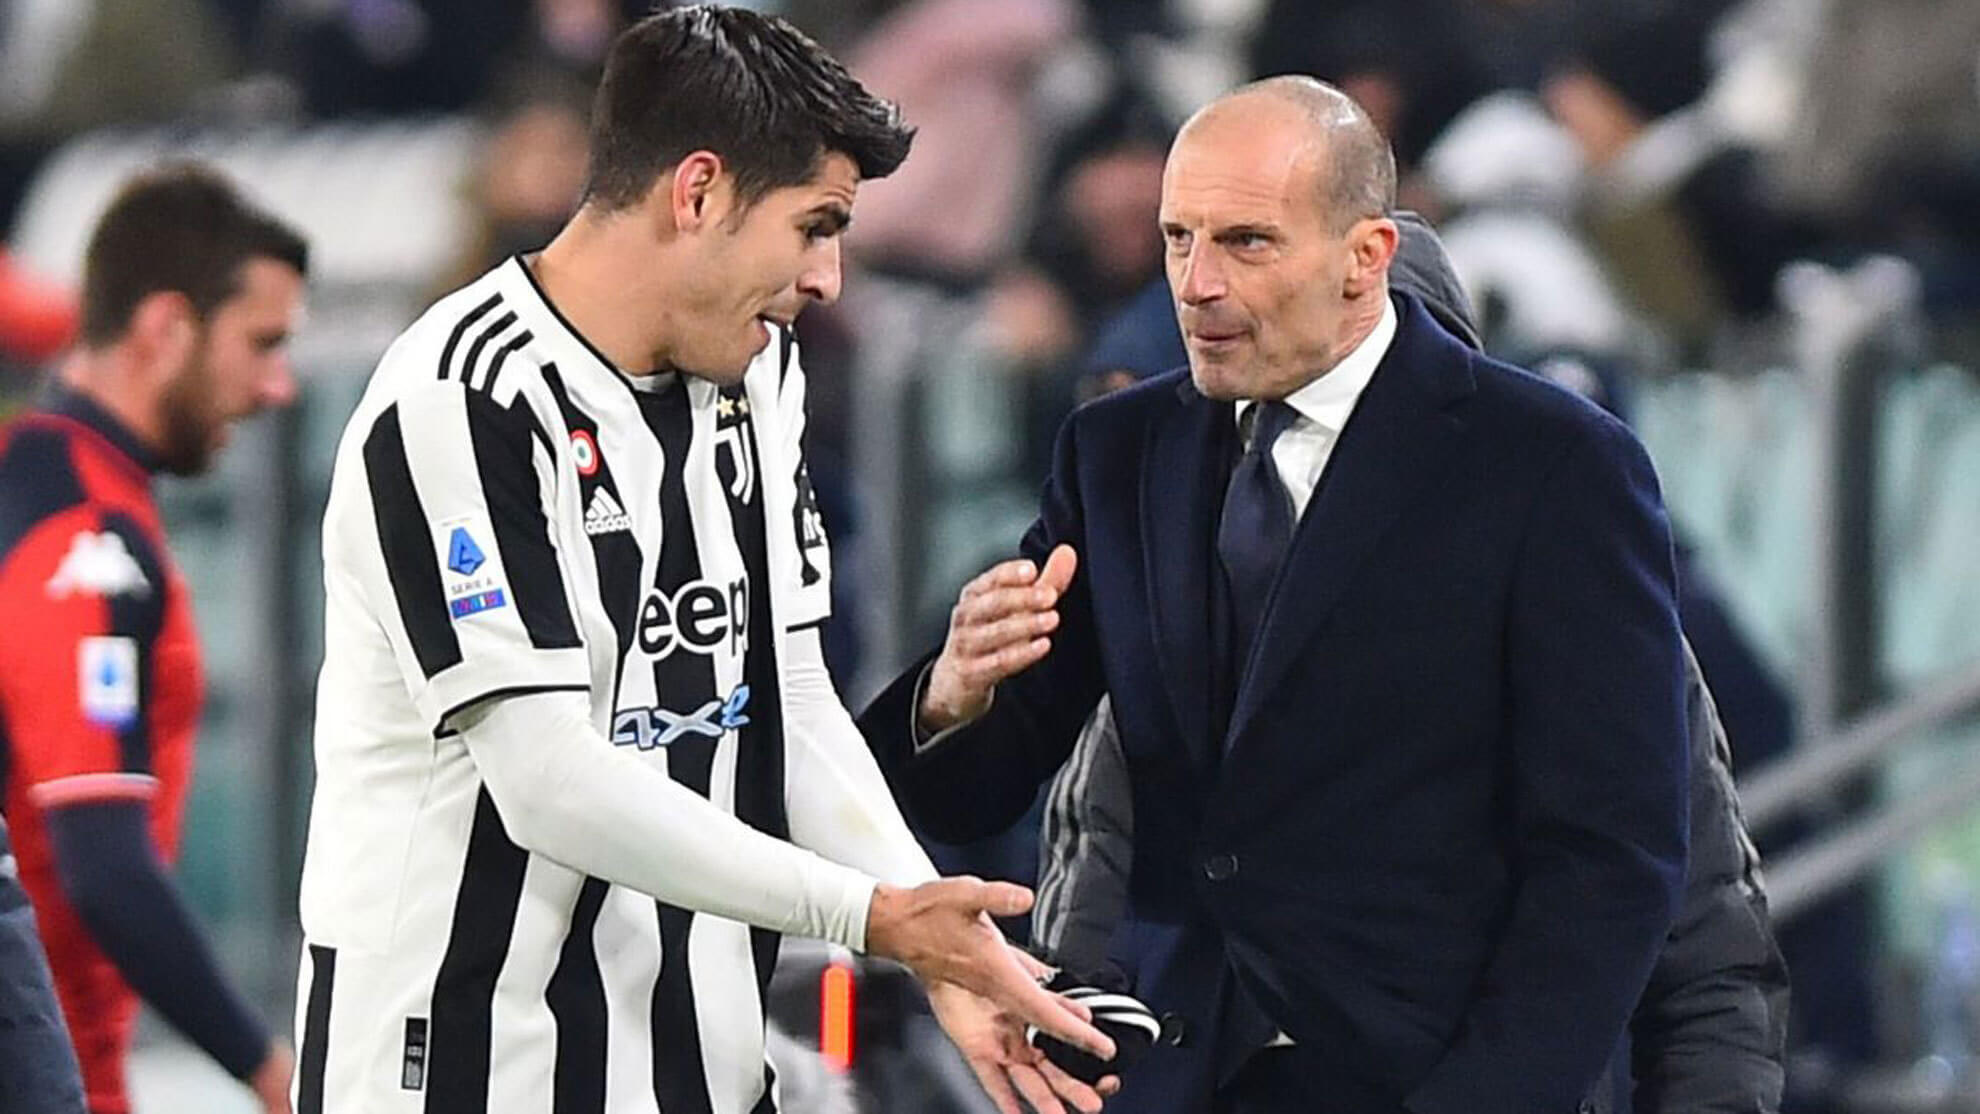 Juventus are not looking to sign Alvaro Morata on permanent transfer